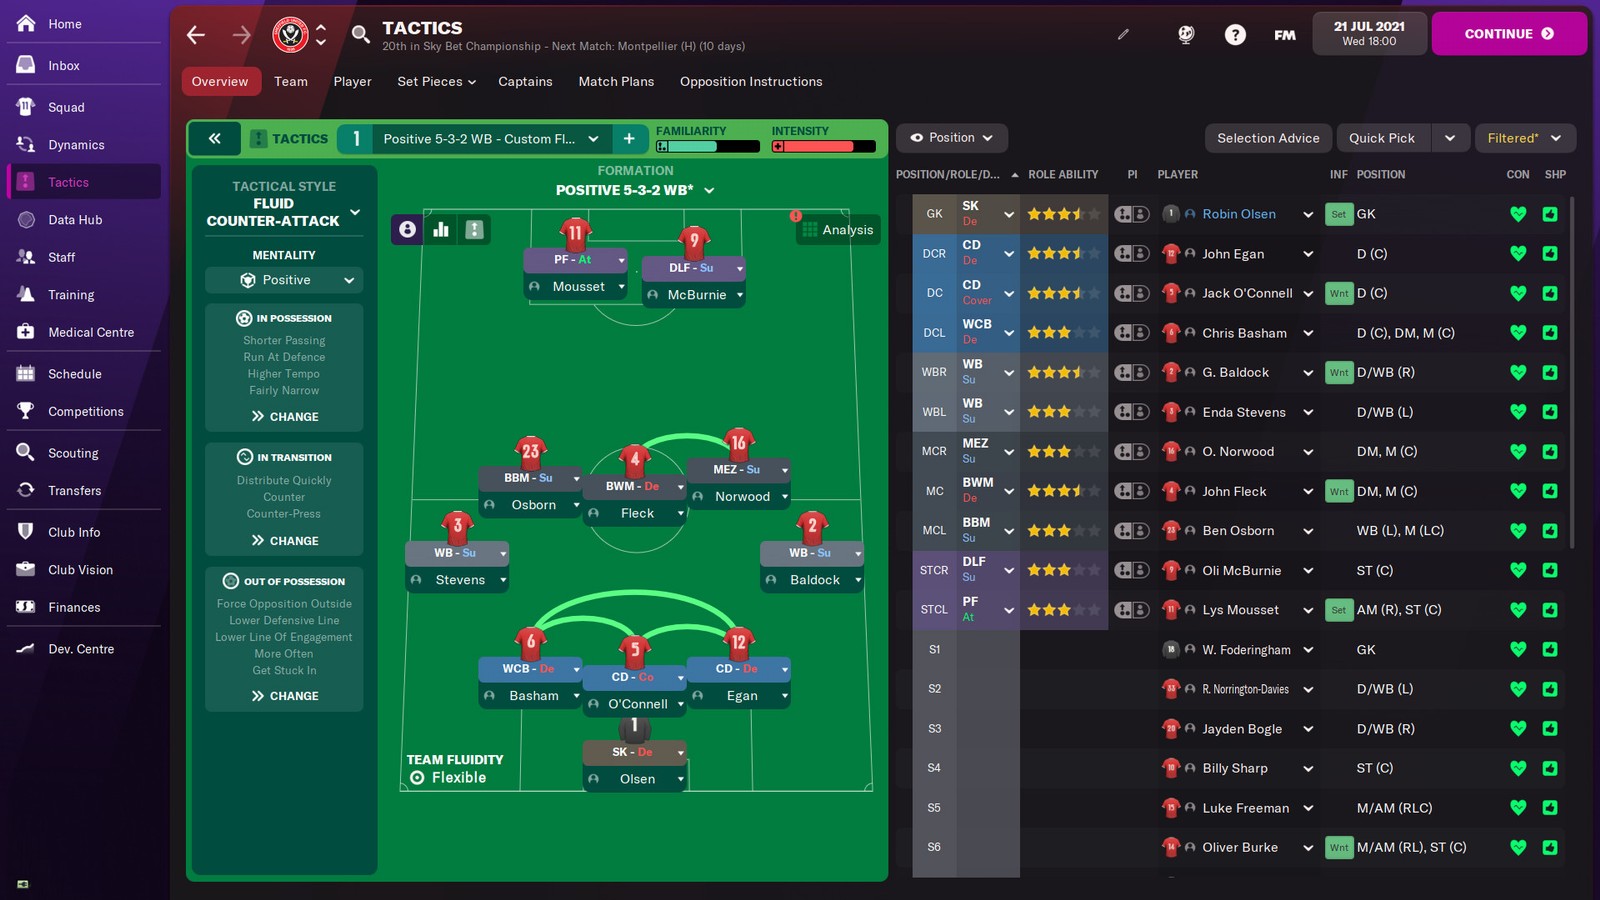 FM22: Editor tutorial - How to get, install and use the free Football  Manager 2022 editor 